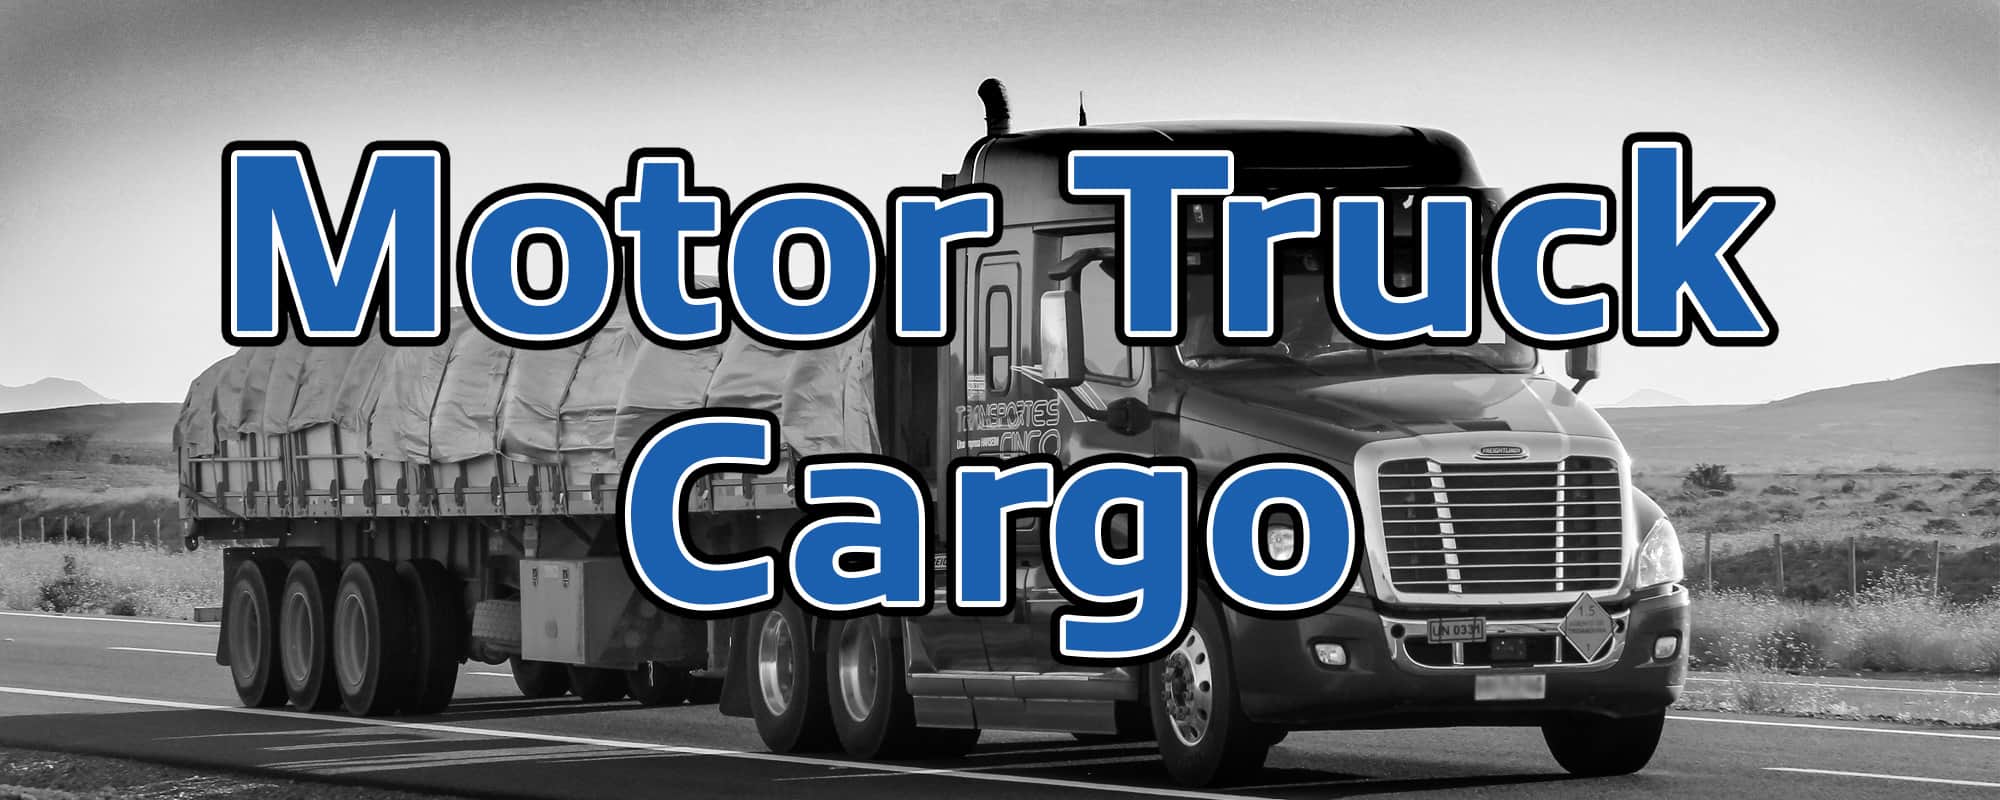 Featured image for “Motor Truck Cargo”